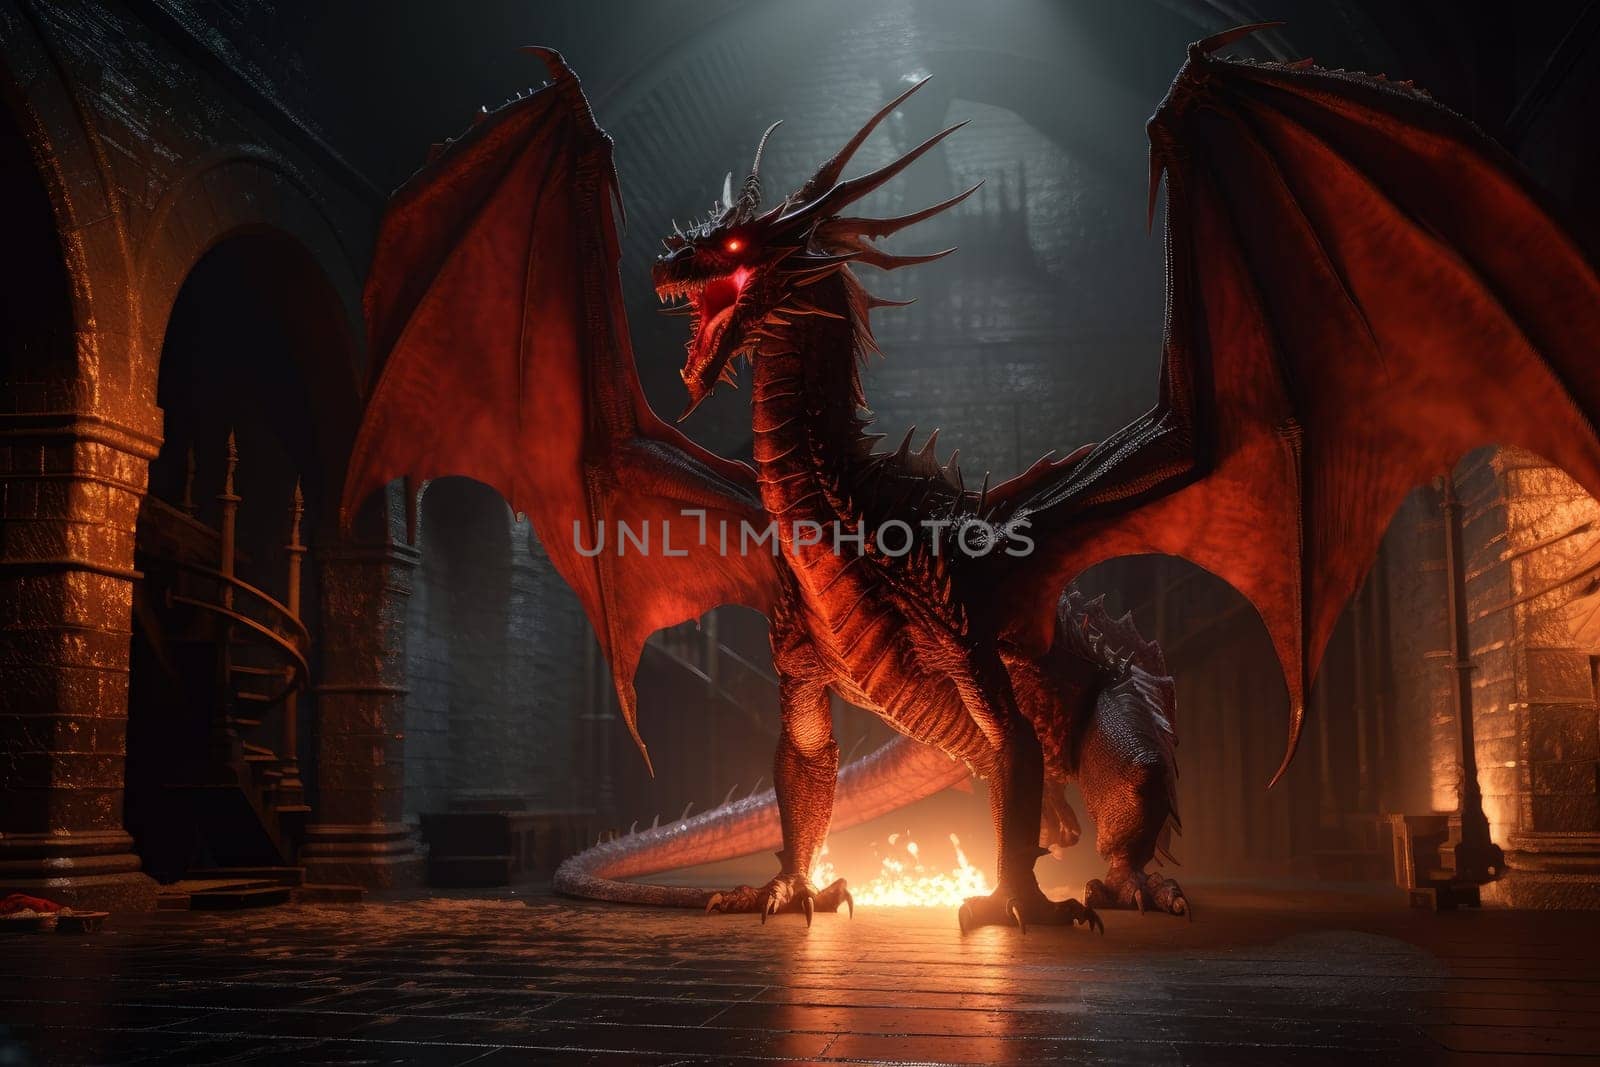 Dragon breathing fire. Castle monster by ylivdesign